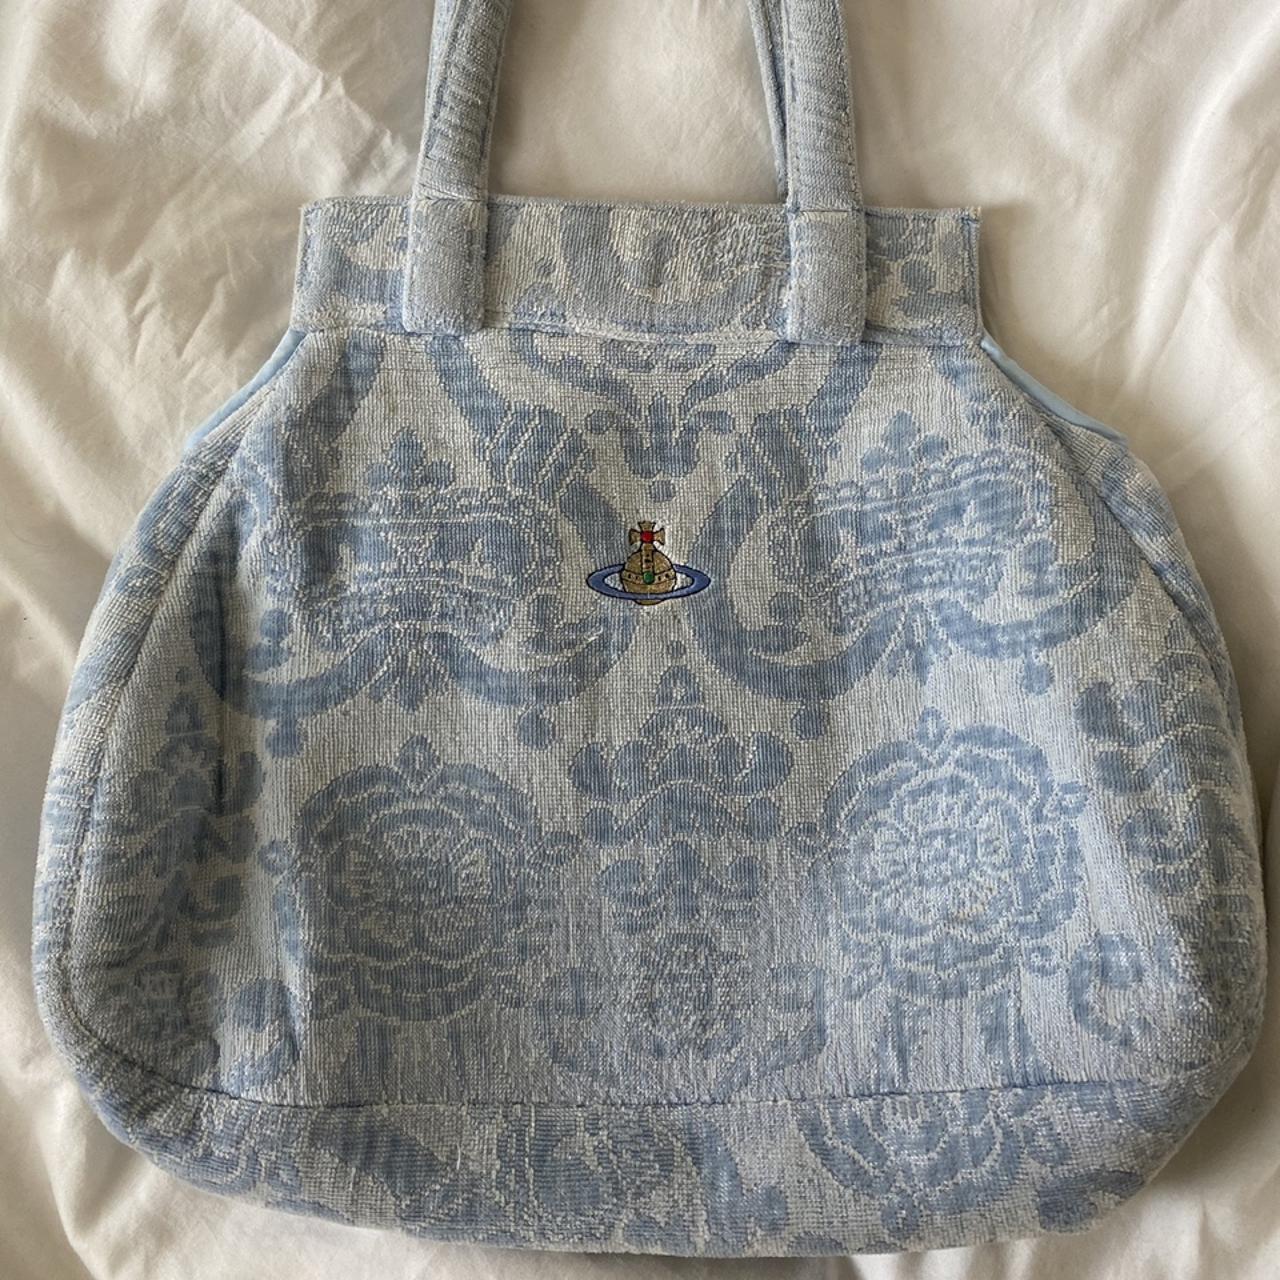 Vivienne Westwood Women's Blue and White Bag